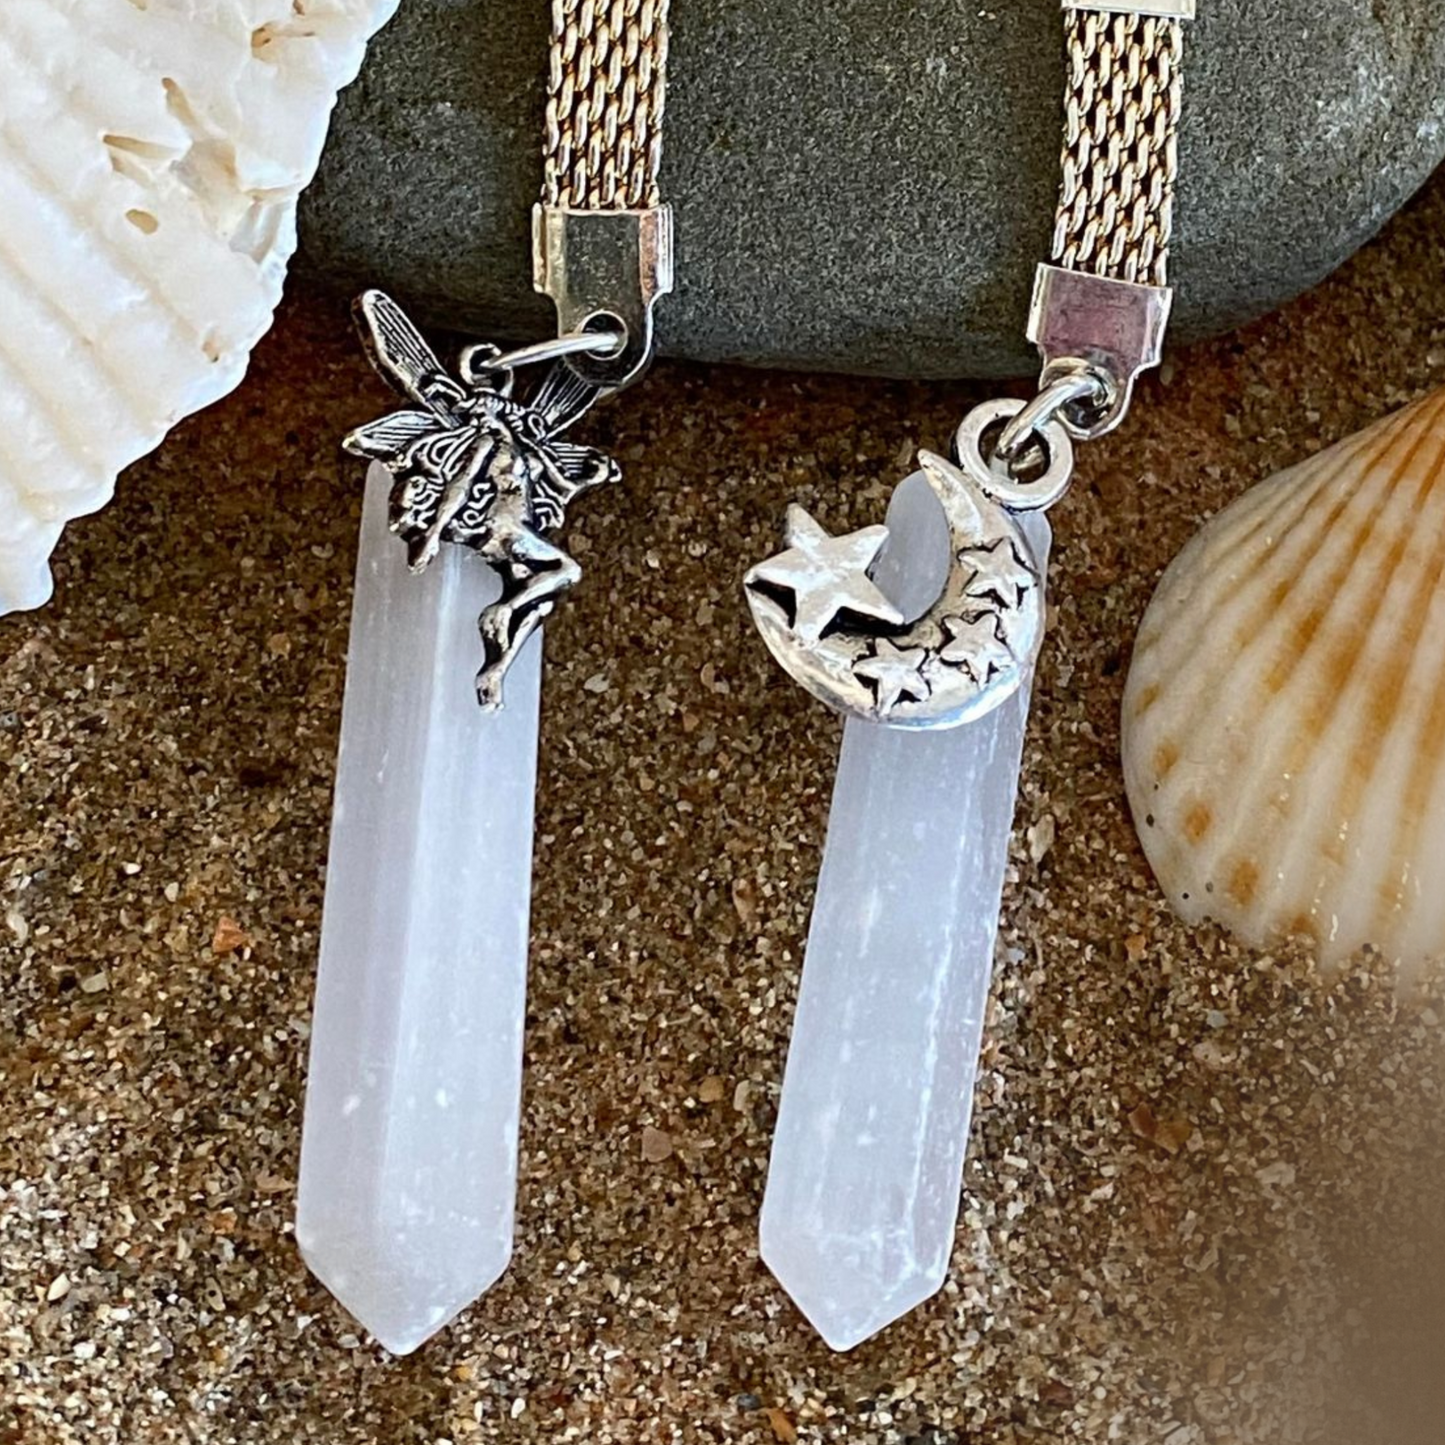 Selenite Key Rings with Fairy or Moon Charms